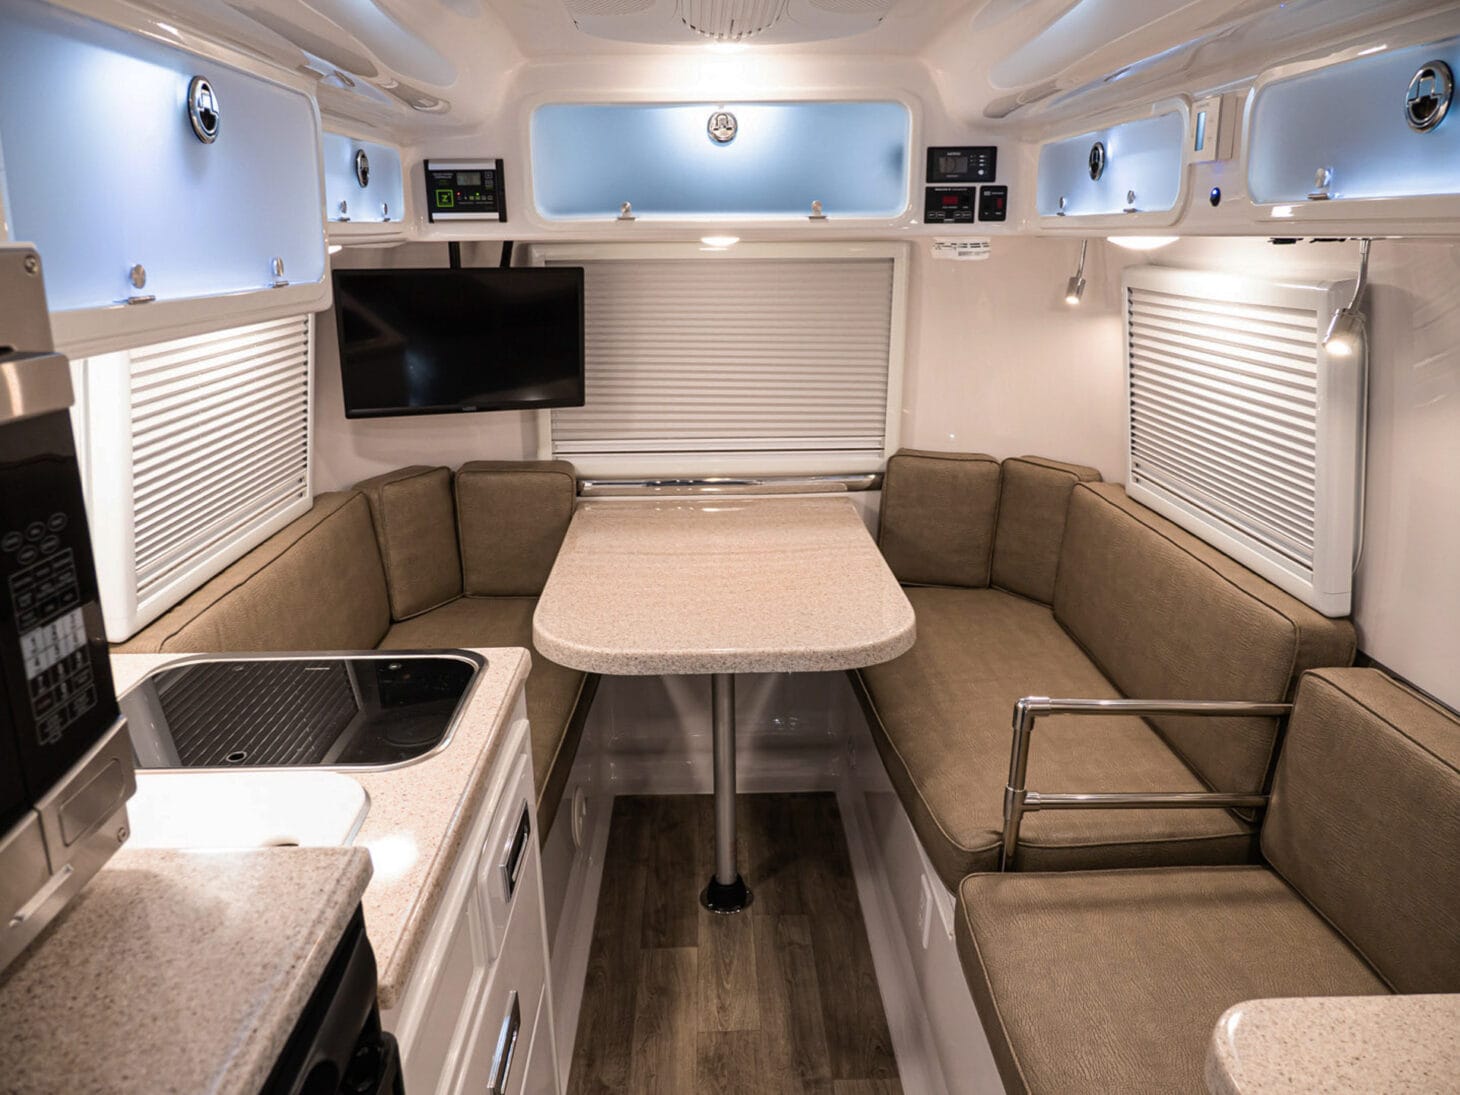 Small RV dinette and kitchen